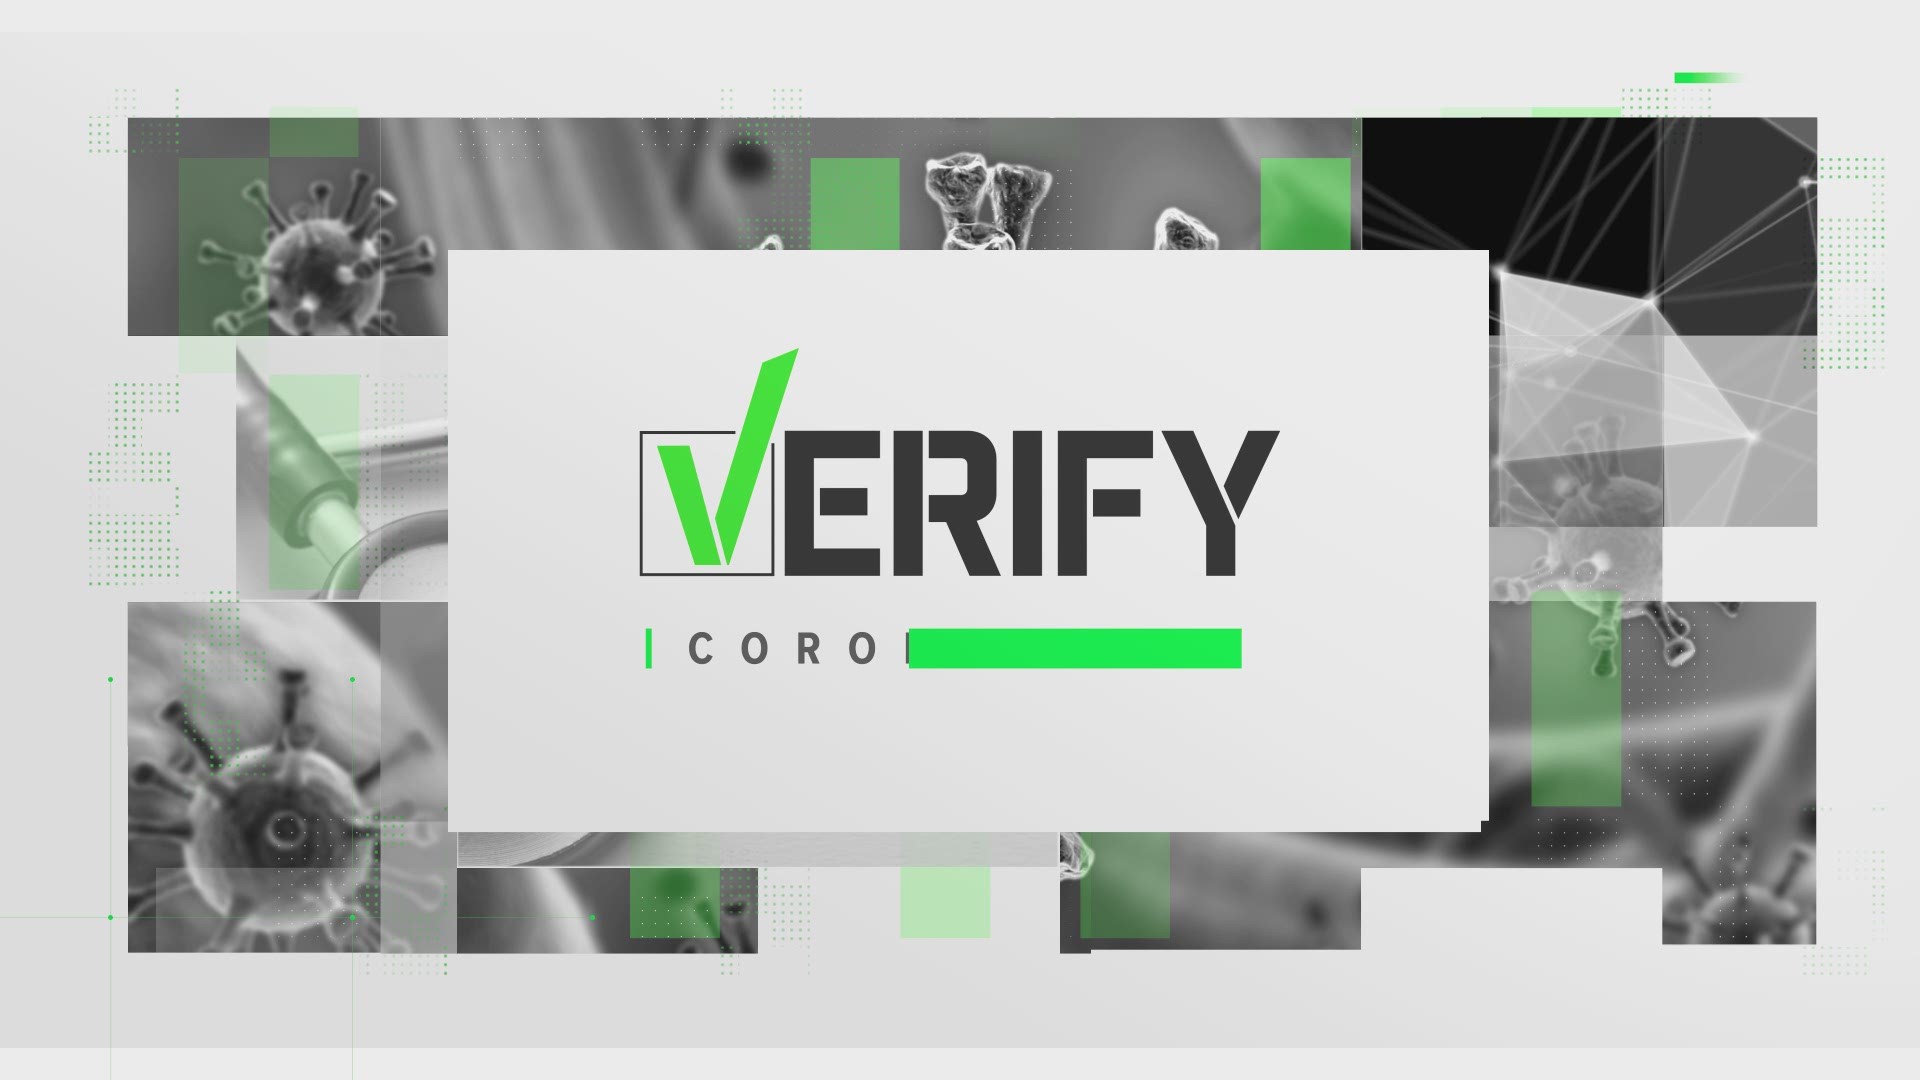 The Verify team looked into a viral claim about the Merck vaccine spreading on social media.